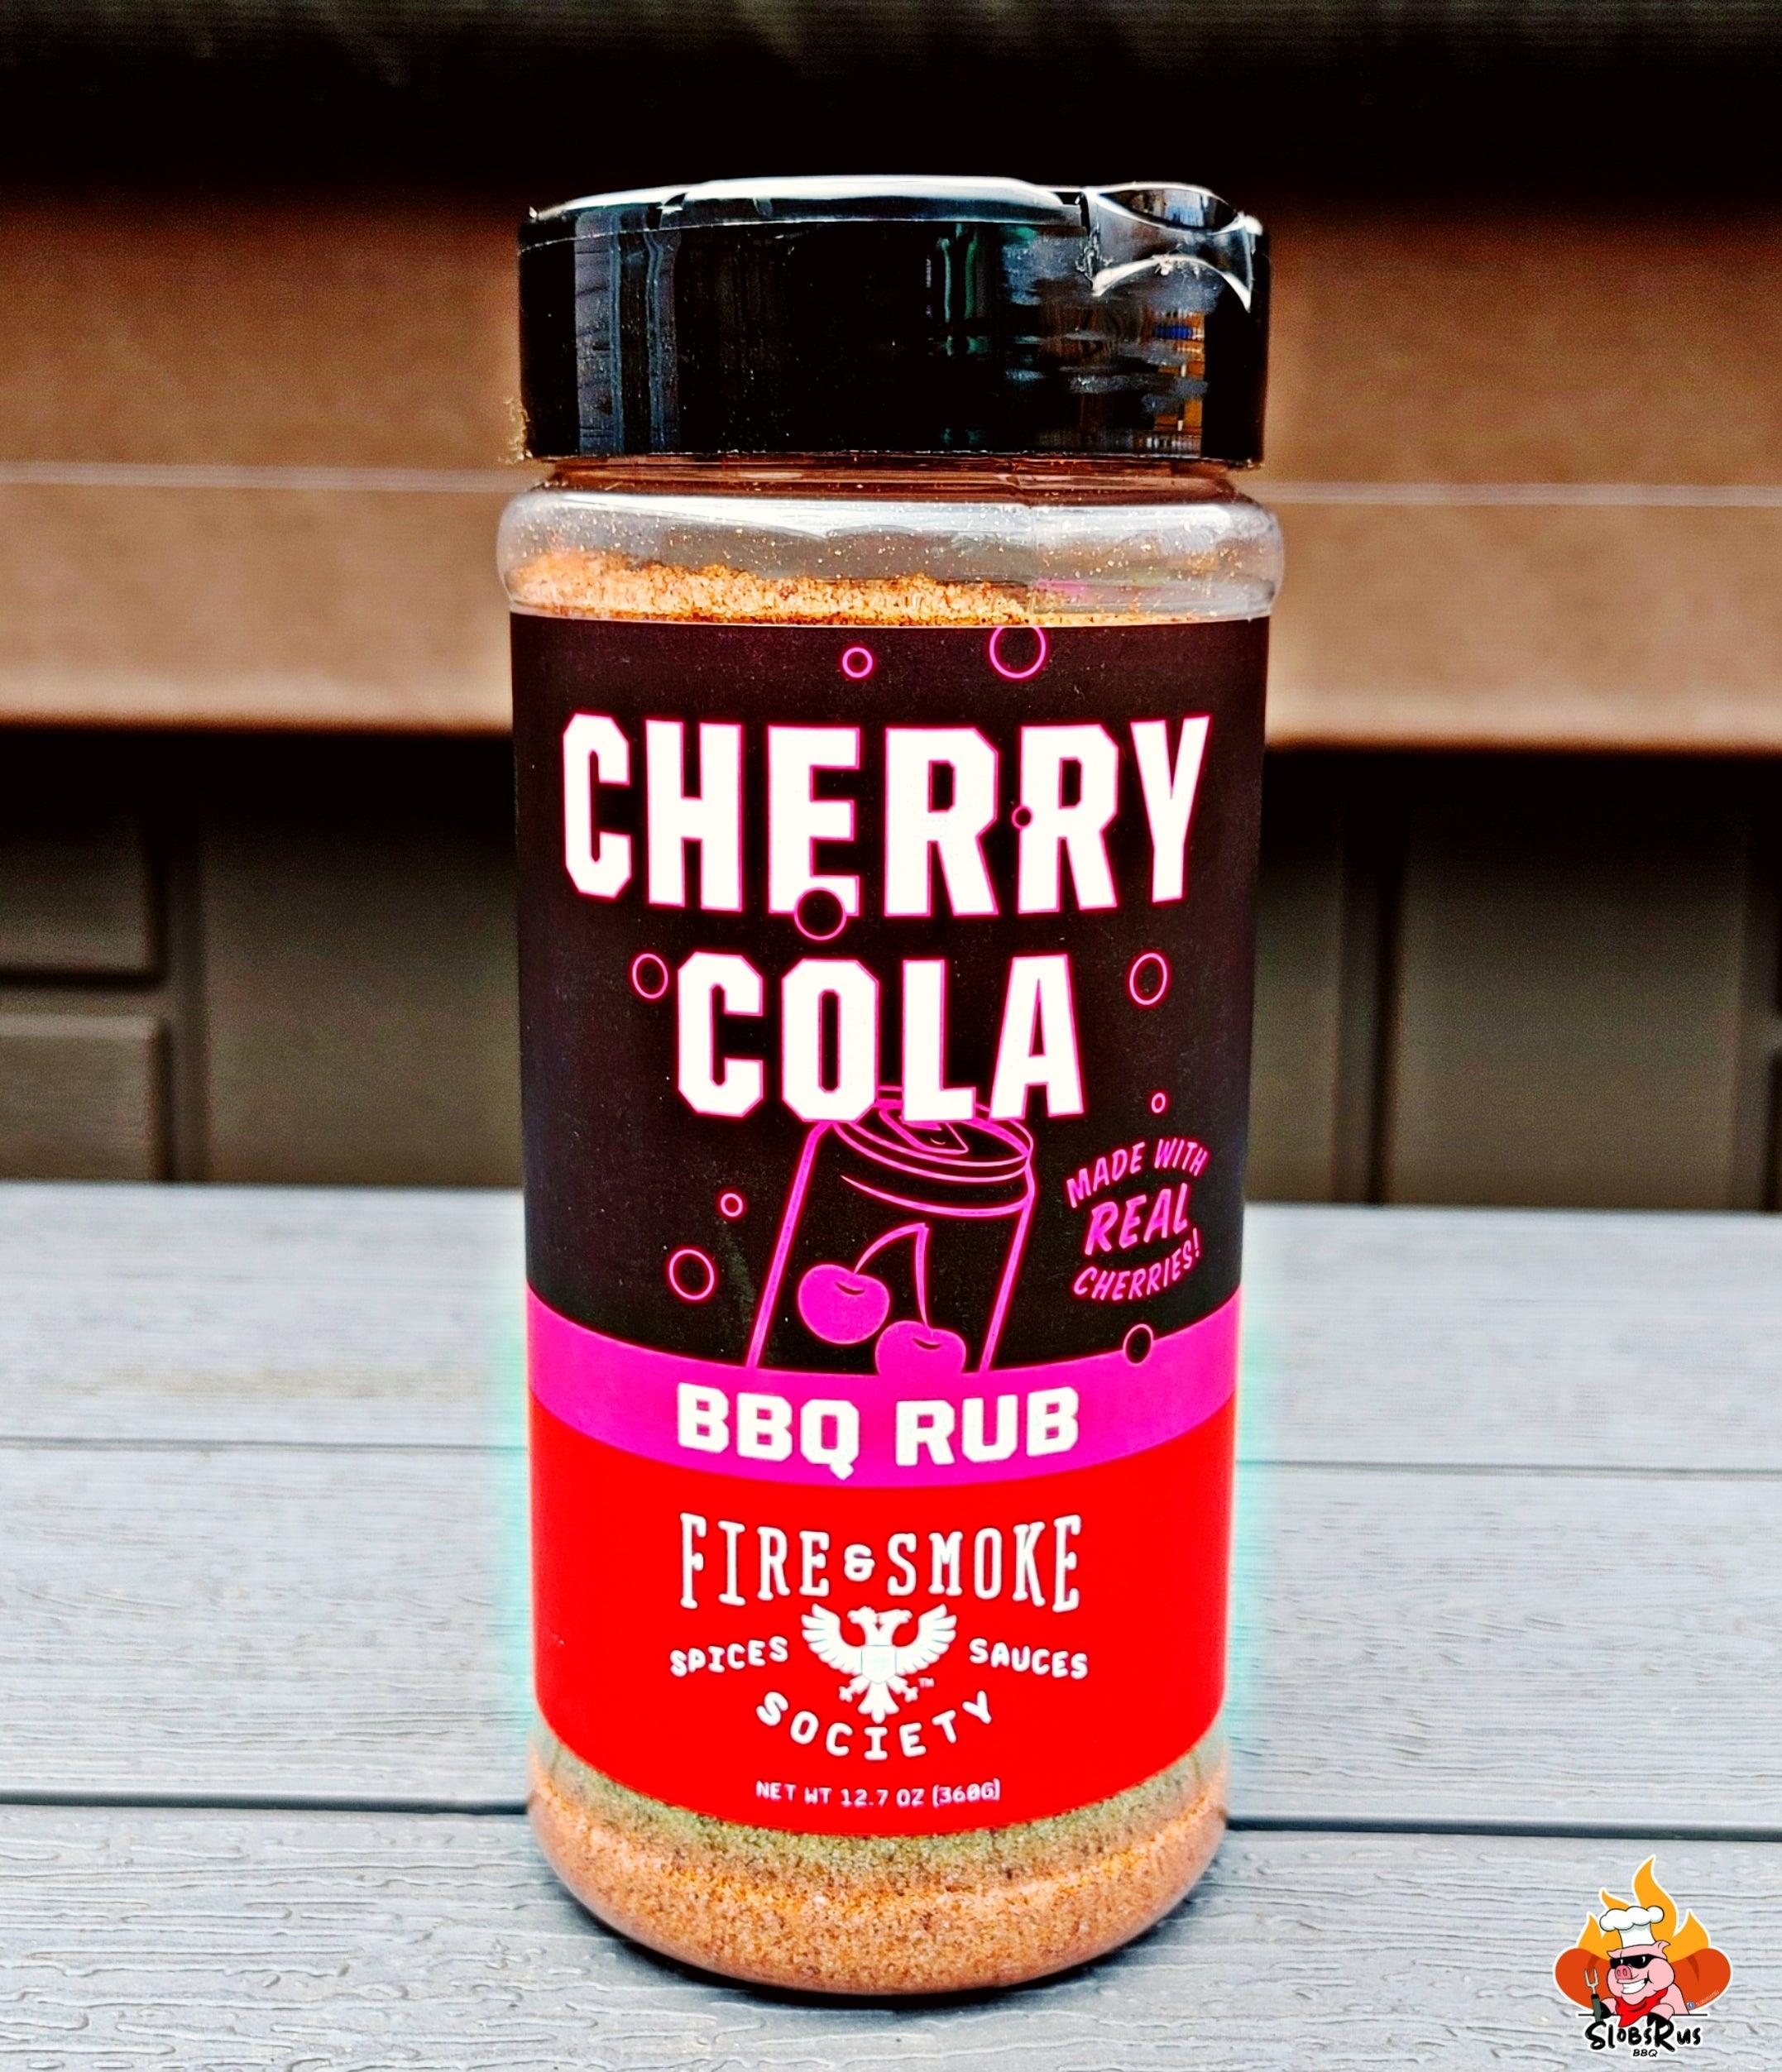  Fire & Smoke Society Cherry Cola BBQ Dry Rub Seasoning for  Smoking and Grilling Meat, Beef, Steak, Turkey, Chicken, Lamb, Pork Ribs,  Chops, Barbecue Spices, Allspice and Natural Cola Flavor 